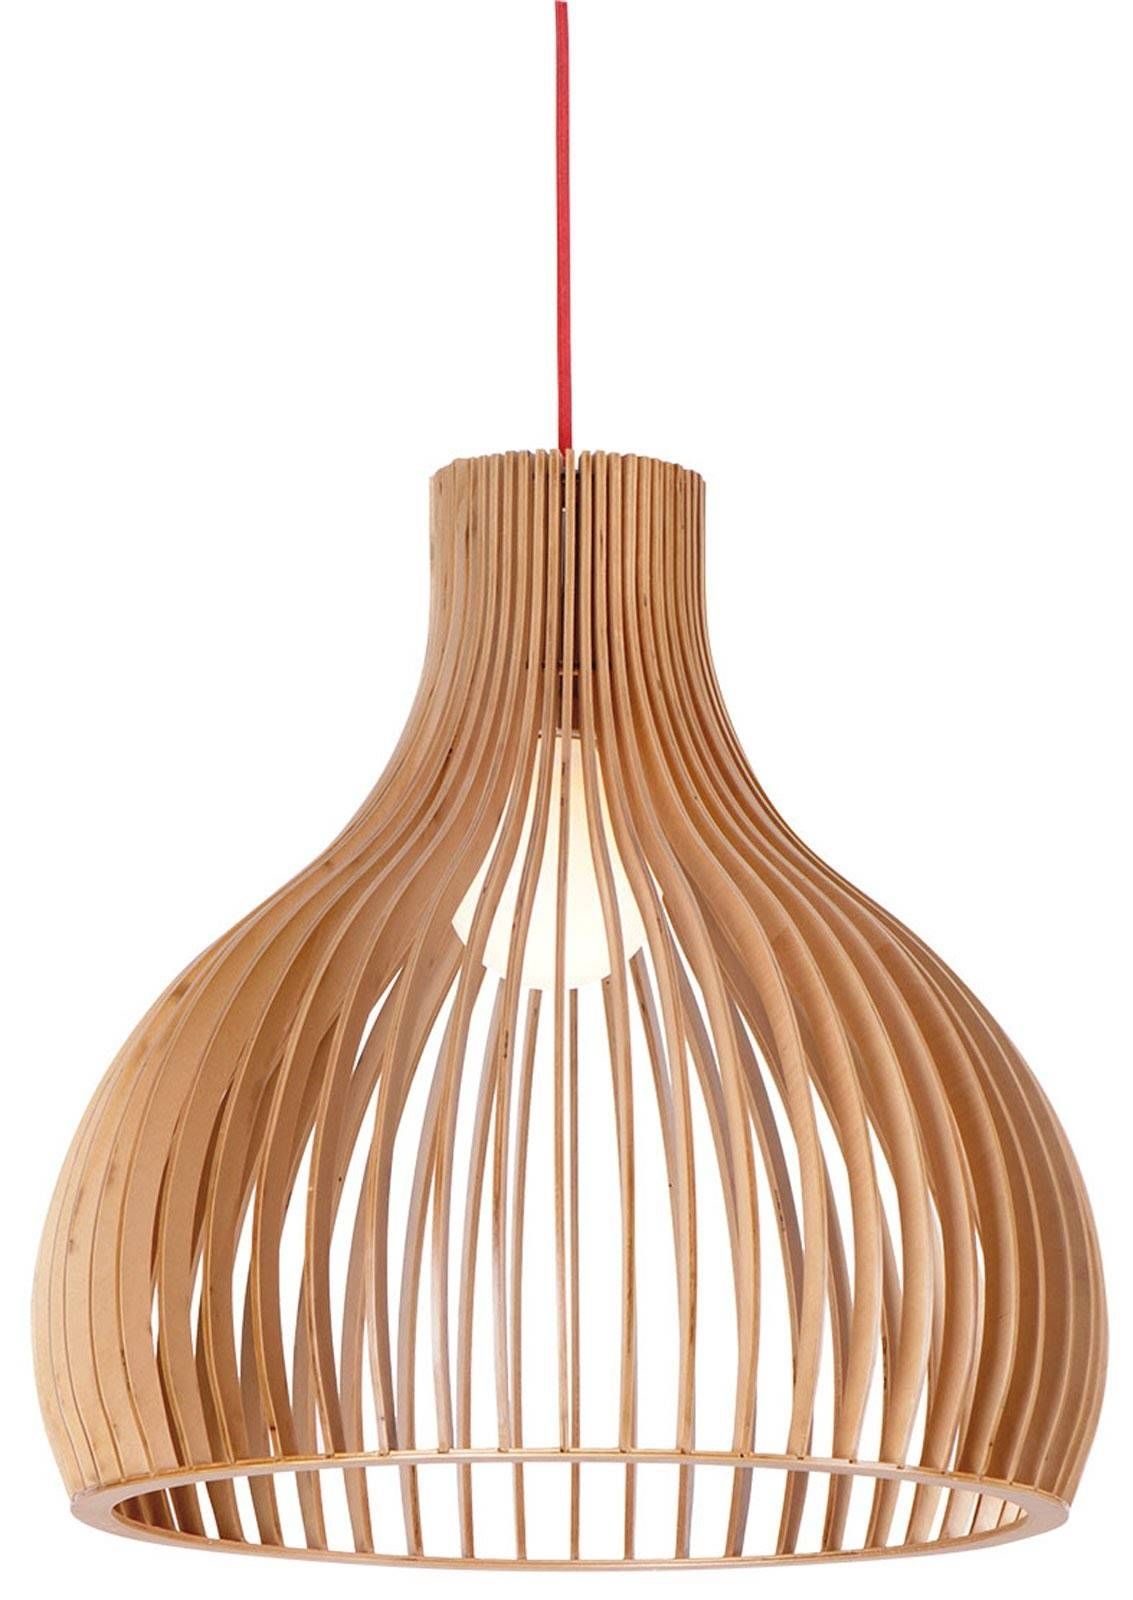 Buy Wood Pendant Light In Melbourne [malmo] – Youtube Throughout Bent Wood Pendant Lights (View 2 of 15)